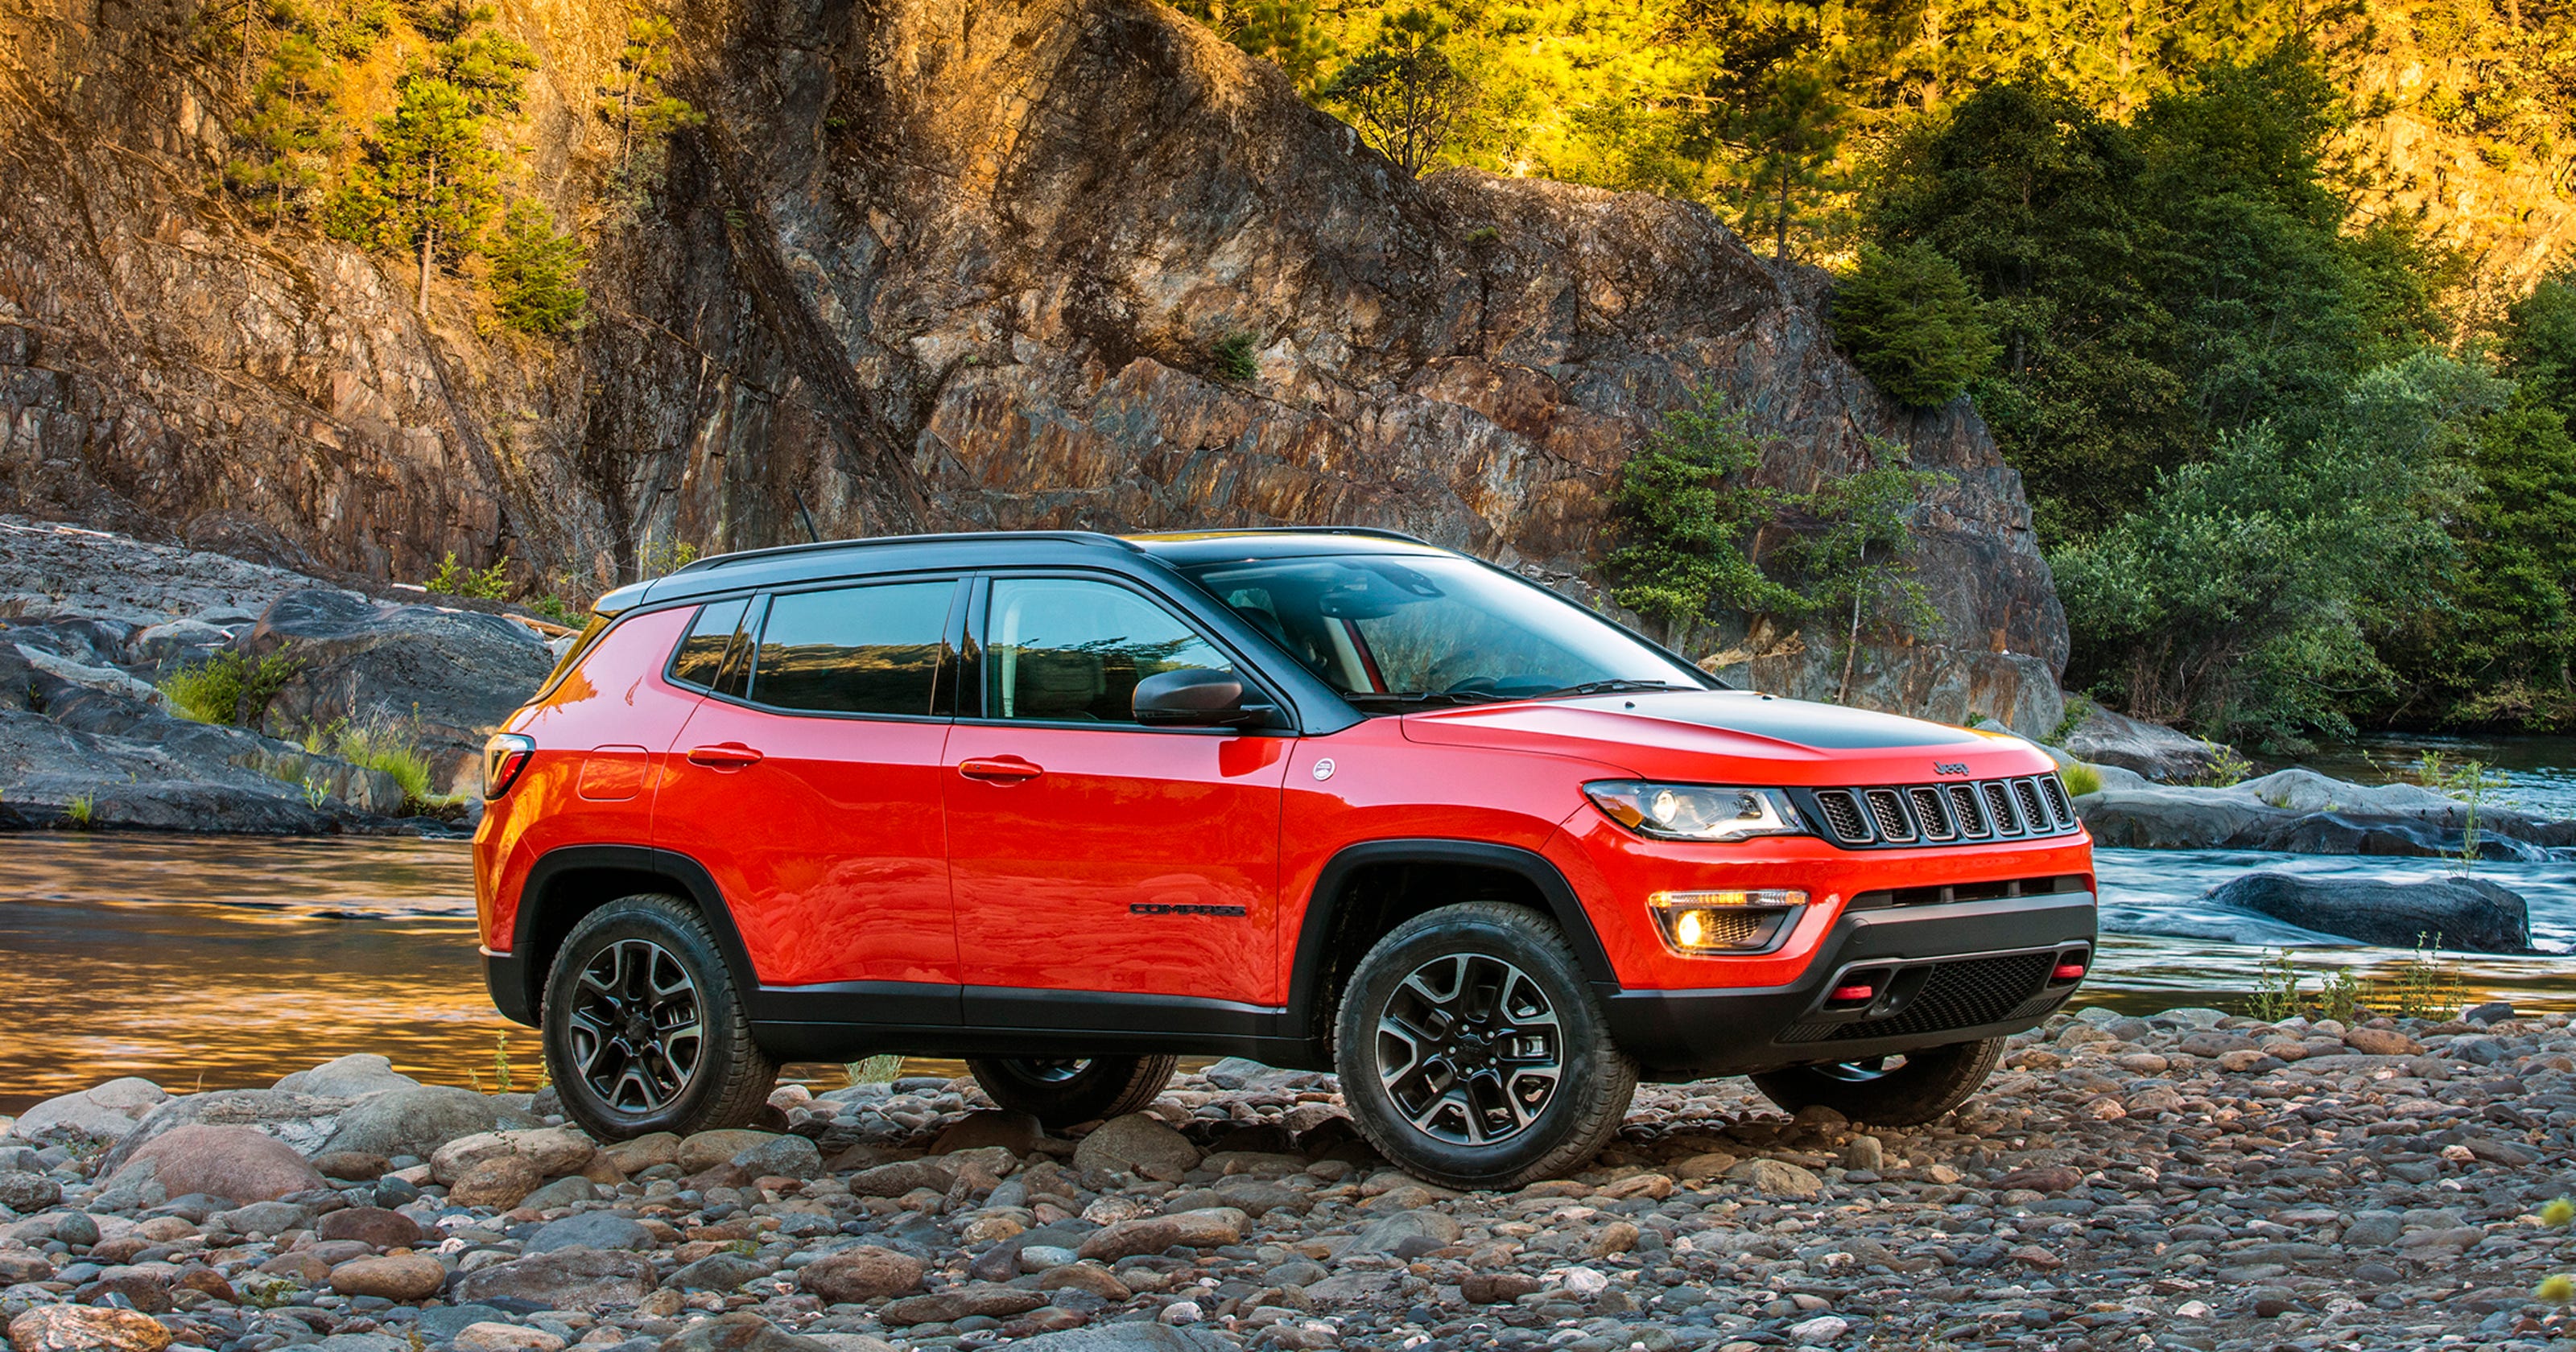 2017 Jeep Compass makes its North American debut today in